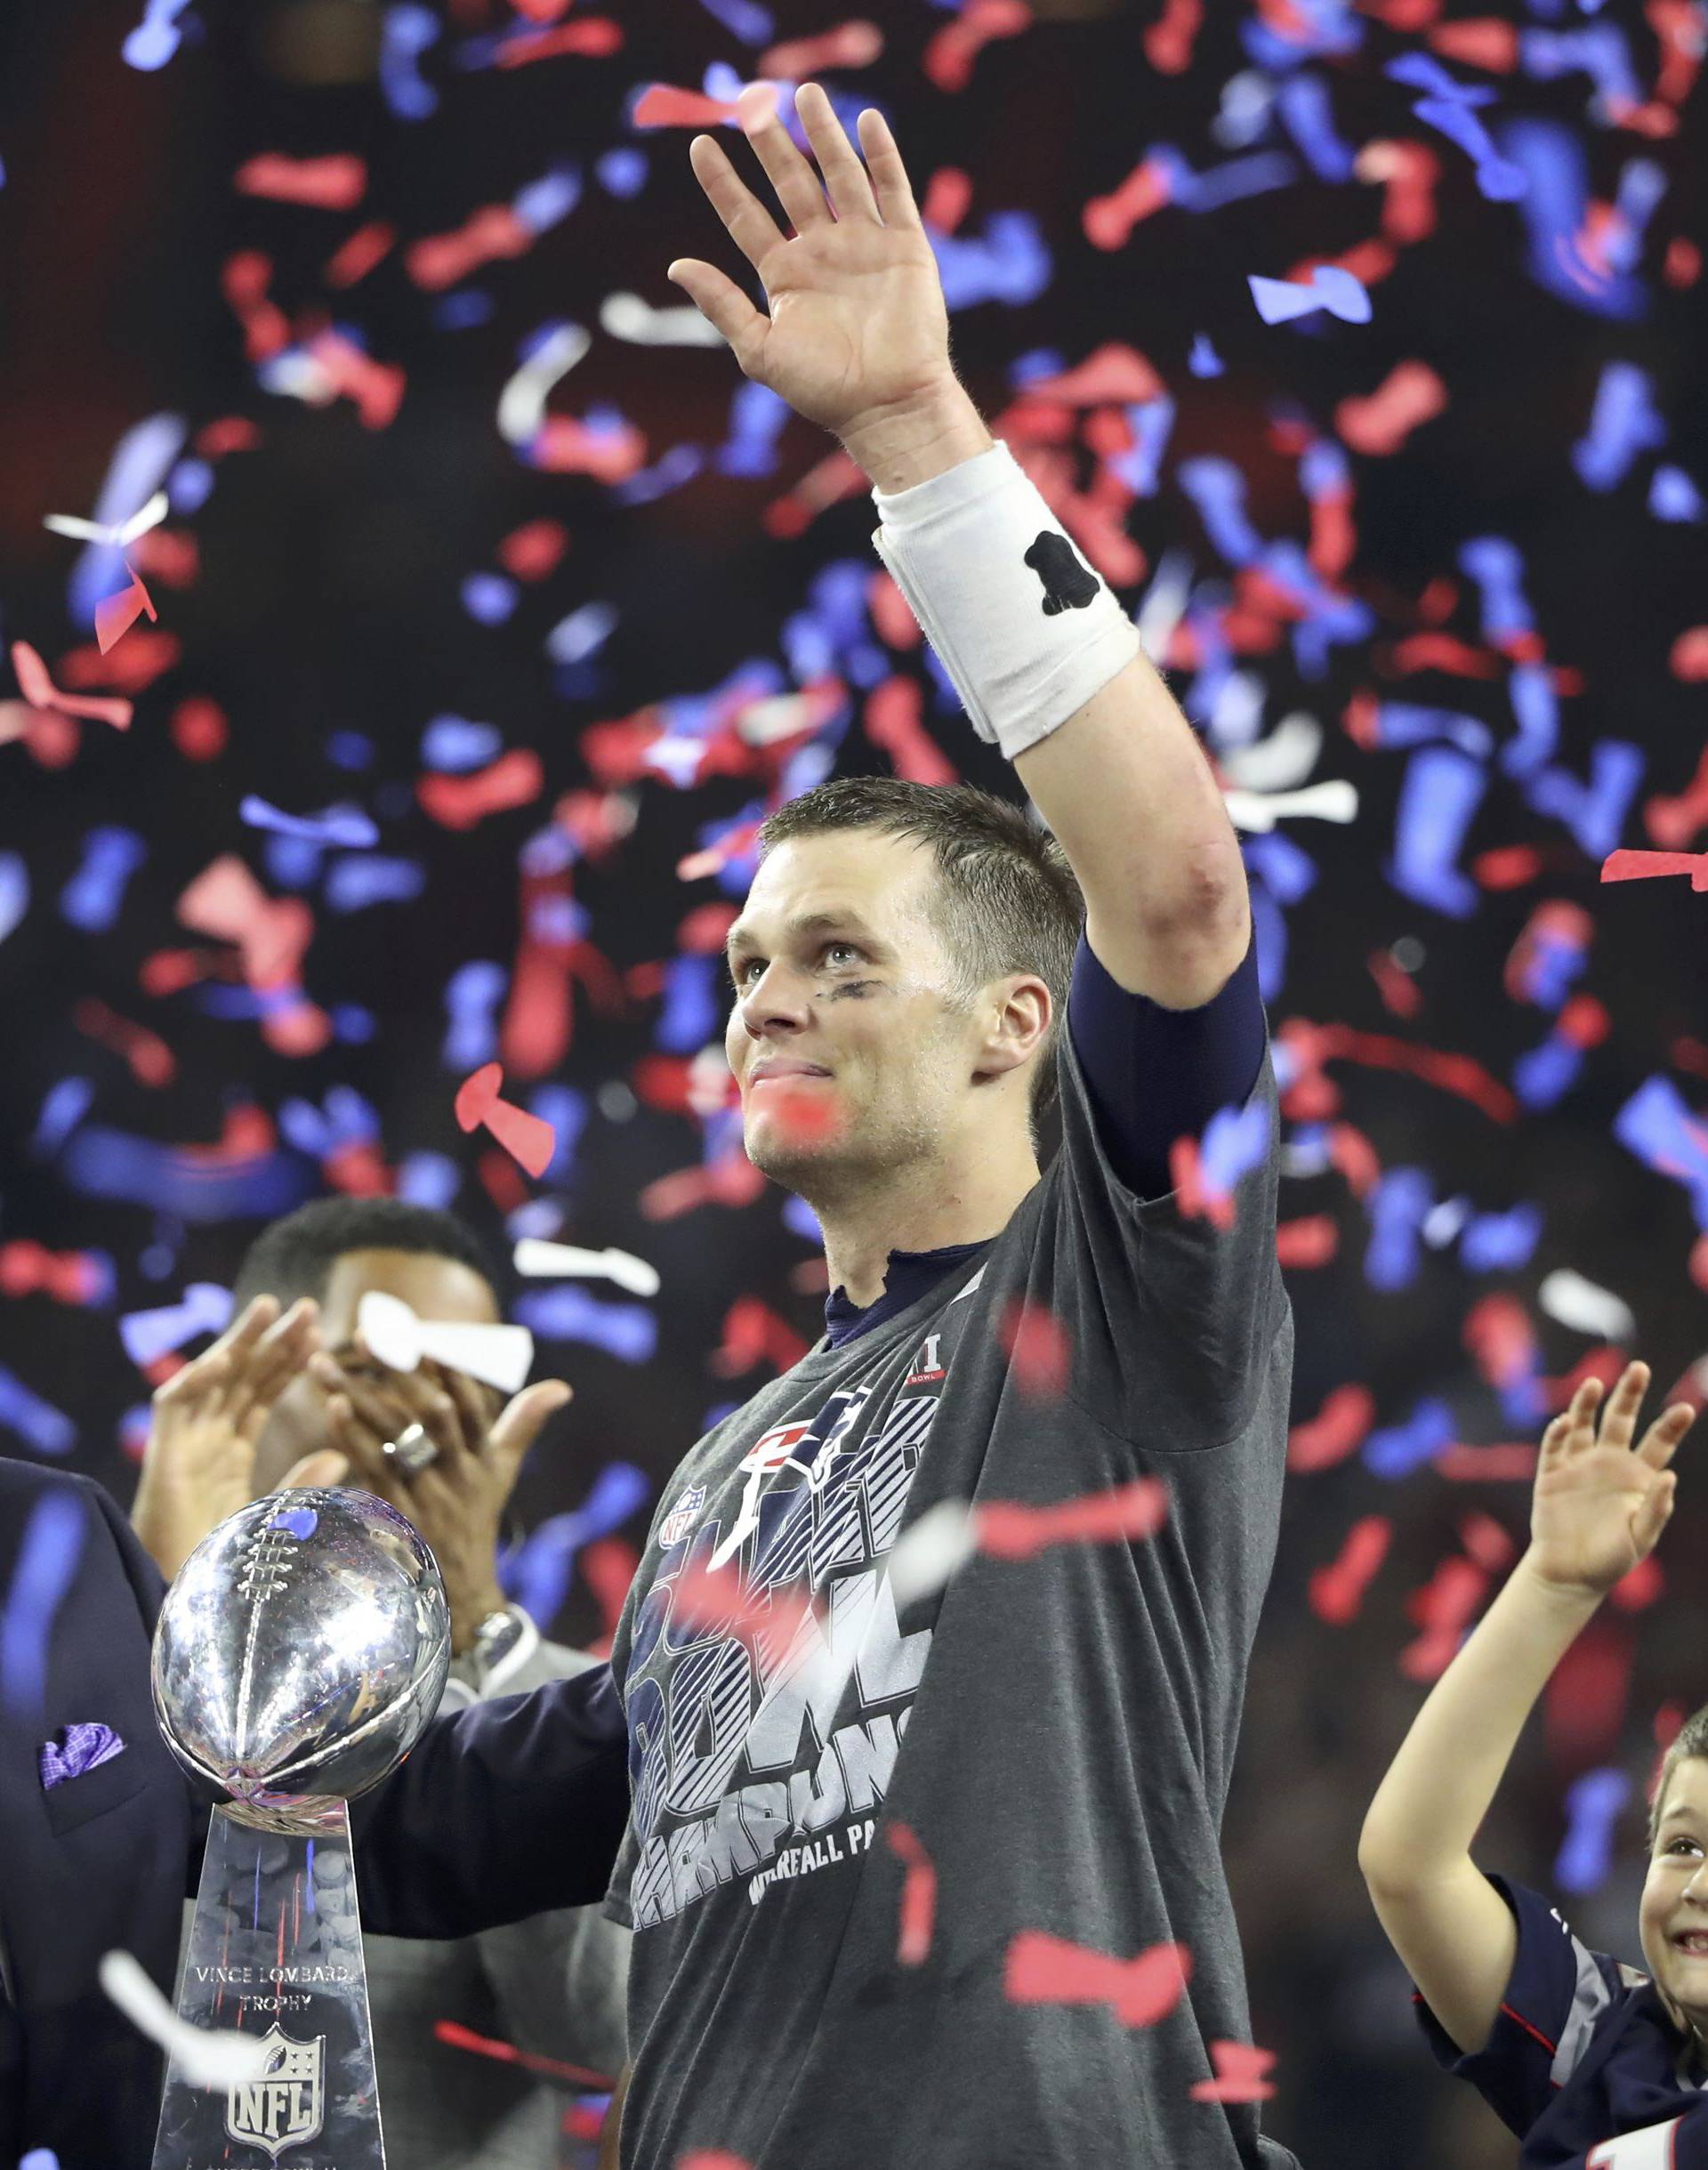 New England Patriots' quarterback Tom Brady holds the Vince Lombardi trophy after his team defeated the Atlanta Falcons to win Super Bowl LI in Houston